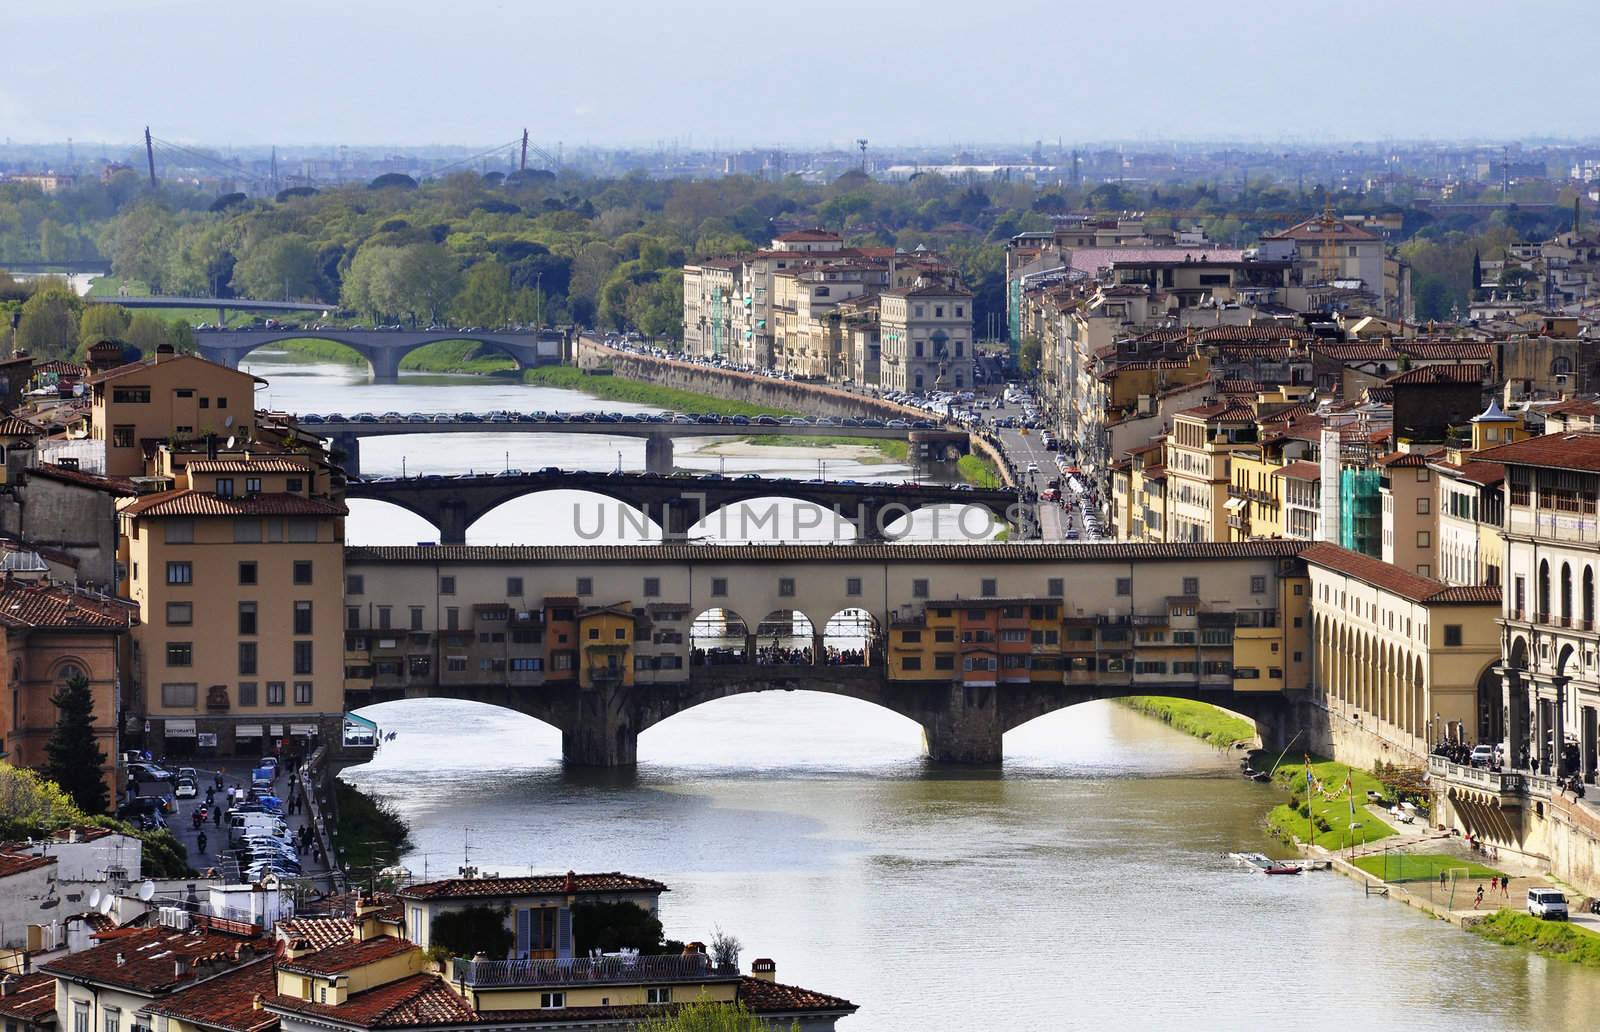 The Ponte Vecchio in Florence by dutourdumonde